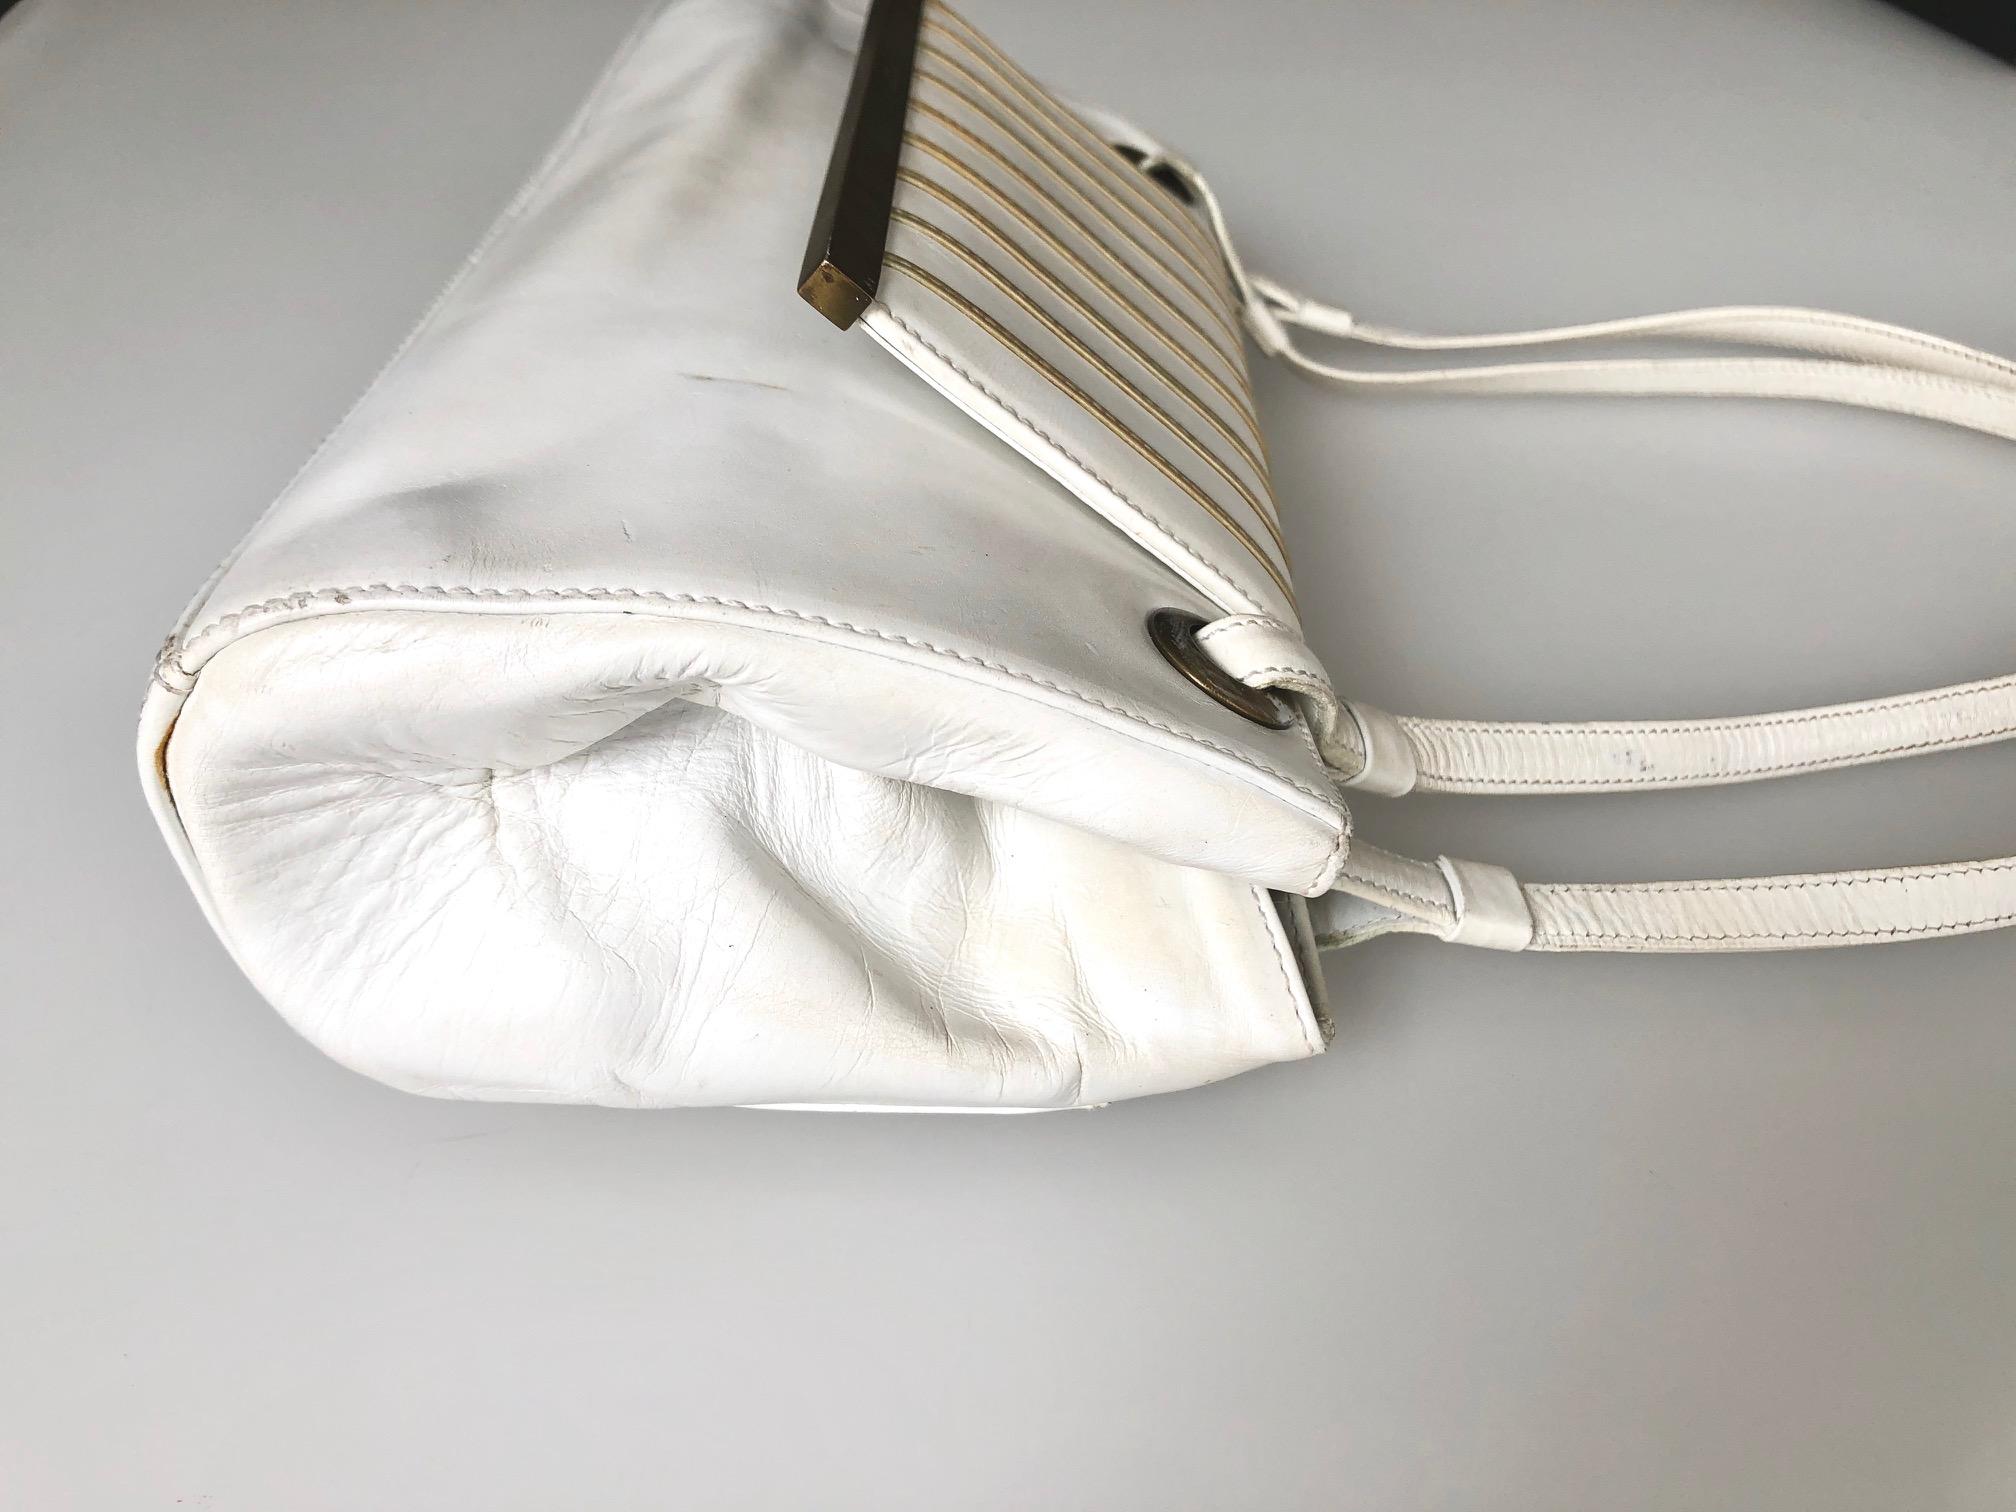 1970s Balmain Paris White Cream and Gold Leather Shoulder Bag  In Good Condition For Sale In London, GB